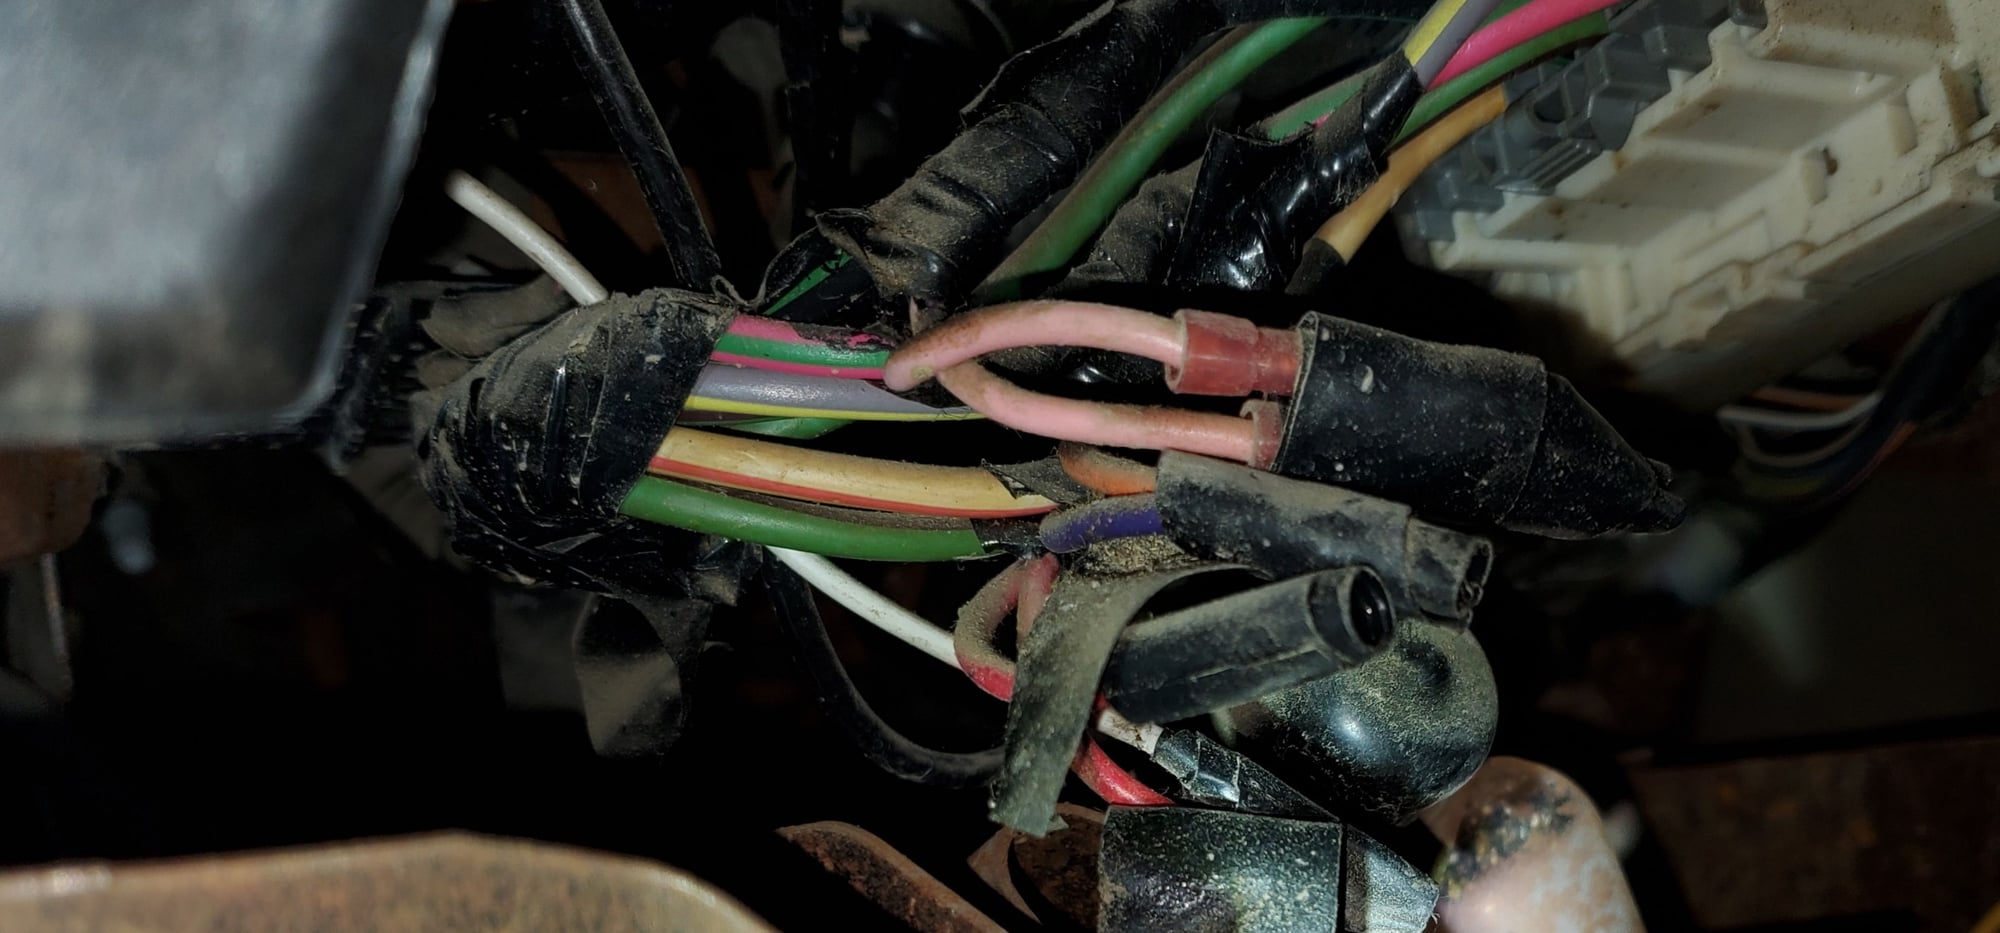 Butchered ignition switch wiring 2005 e150 - Ford Truck Enthusiasts Forums